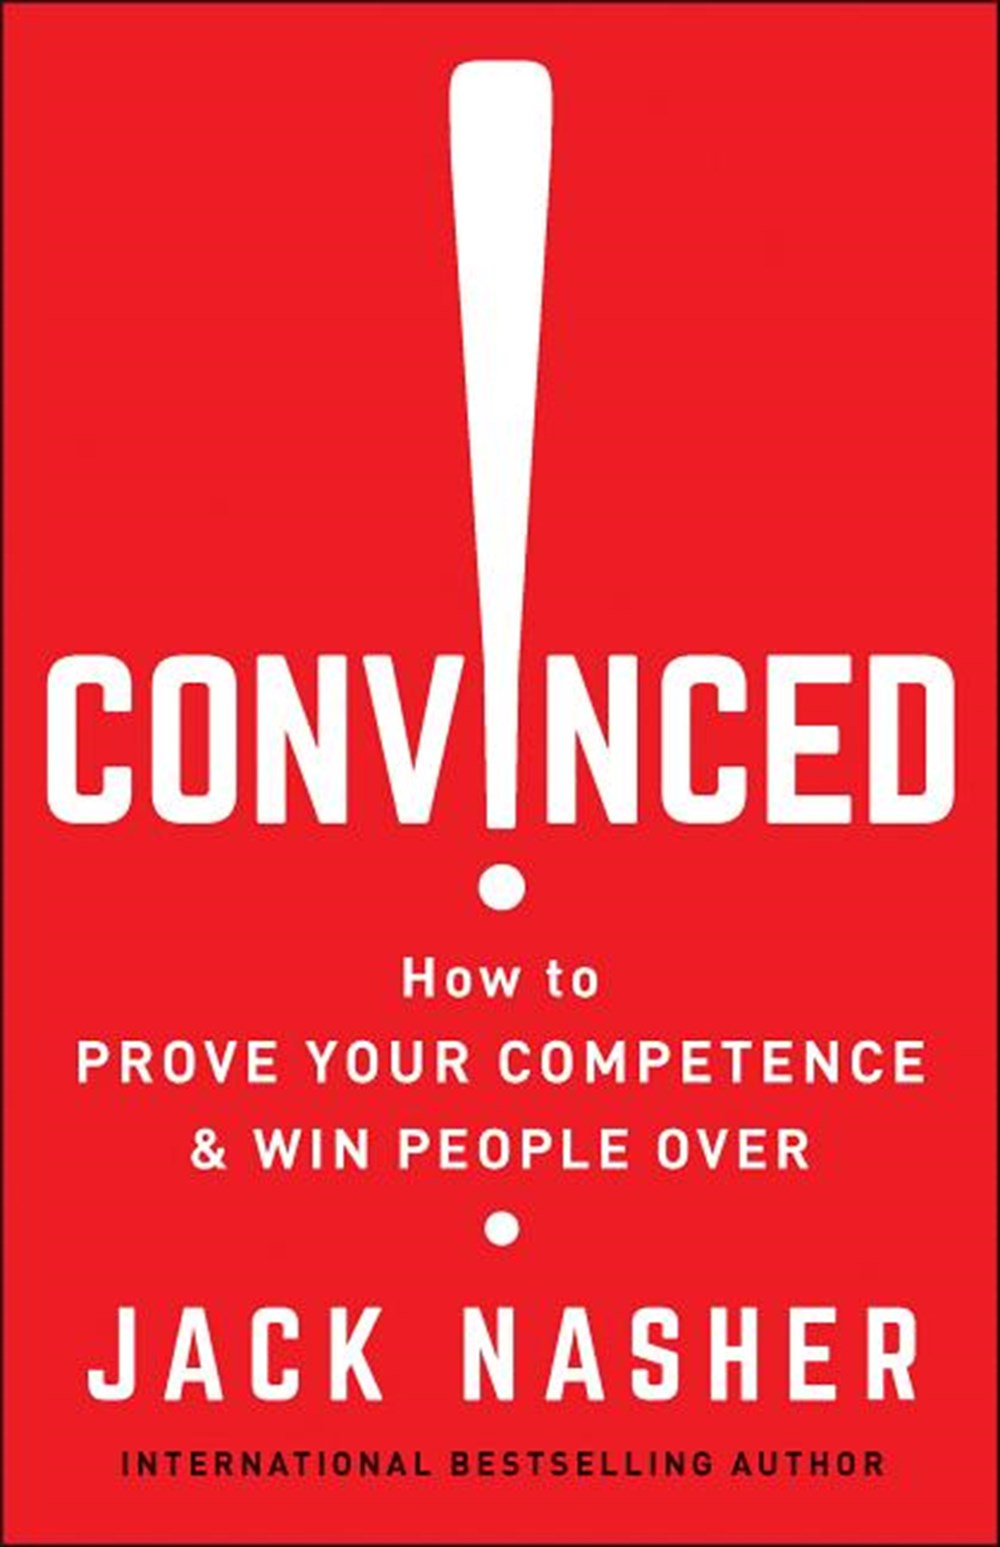 Convinced! How to Prove Your Competence & Win People Over